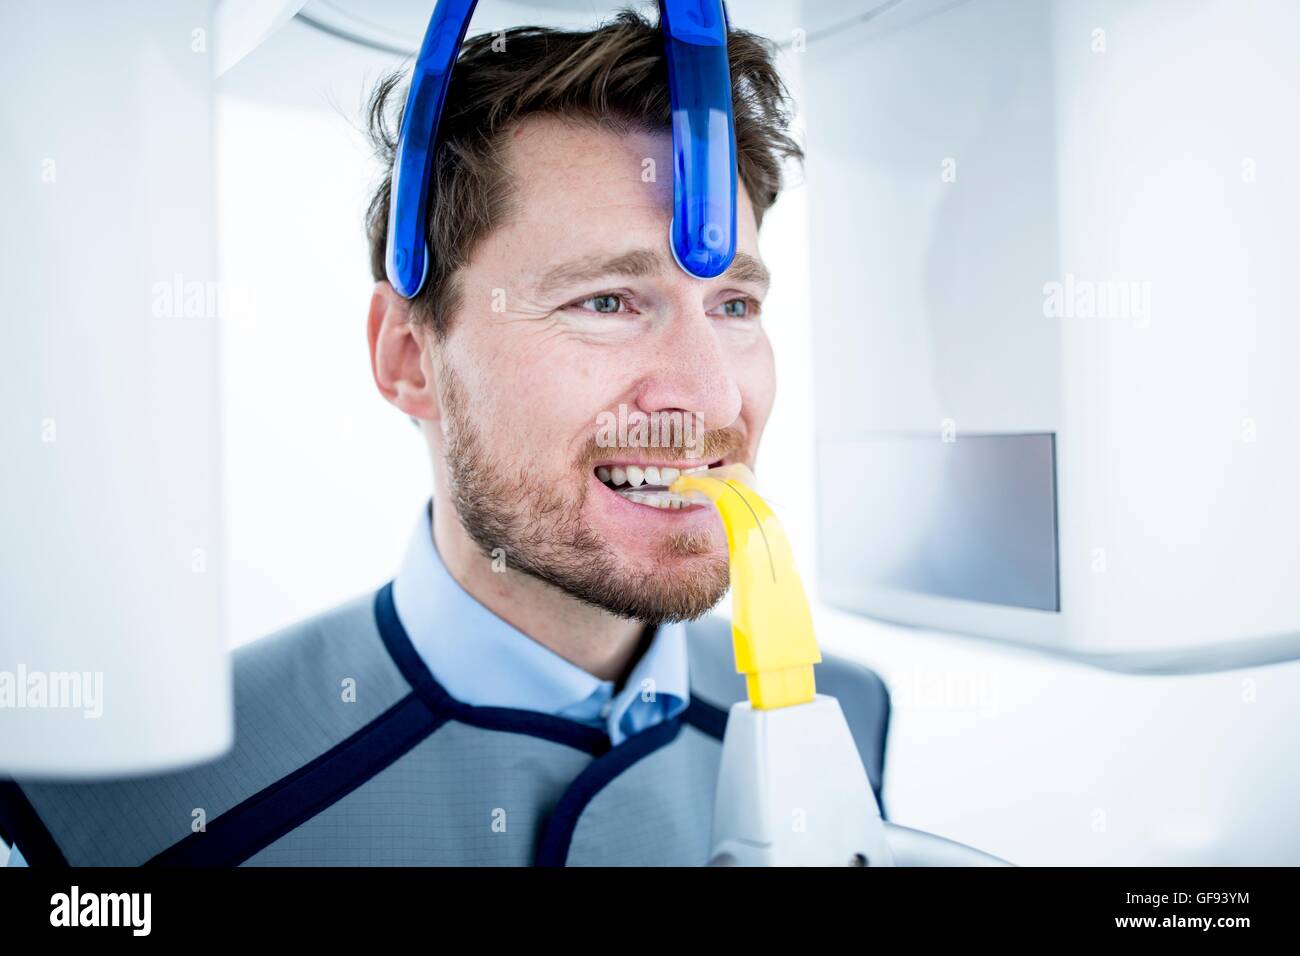 MODEL RELEASED. Mid adult man having x-ray in clinic. Stock Photo